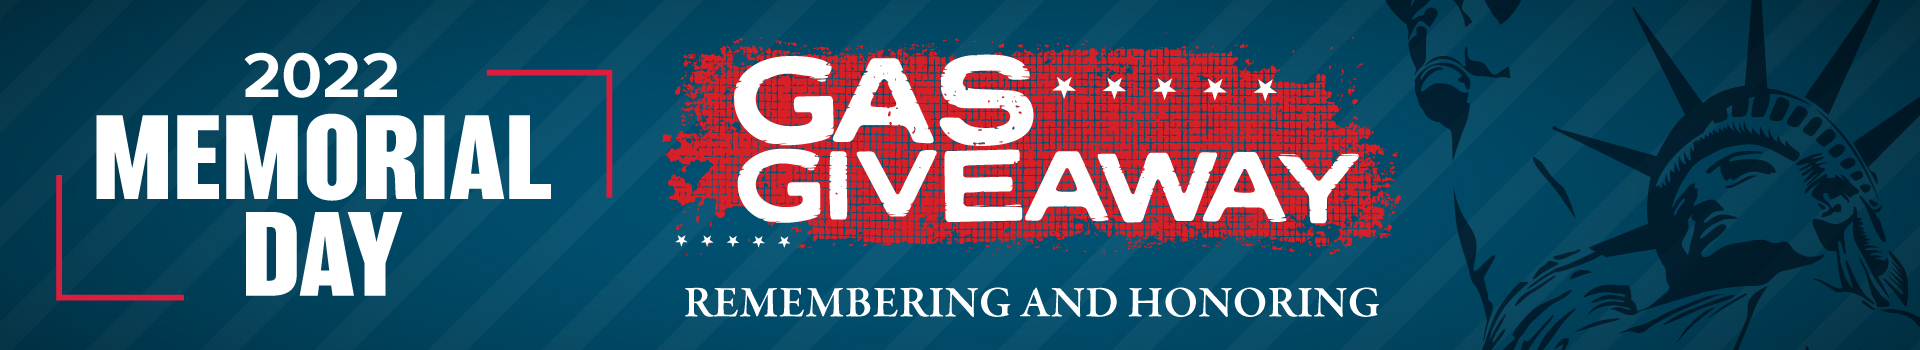 Dark blue striped banner with a silhouette of the Statue of Liberty. Red and white text reads "2022 Memorial Day Gas Giveaway: Remembering and Honoring"